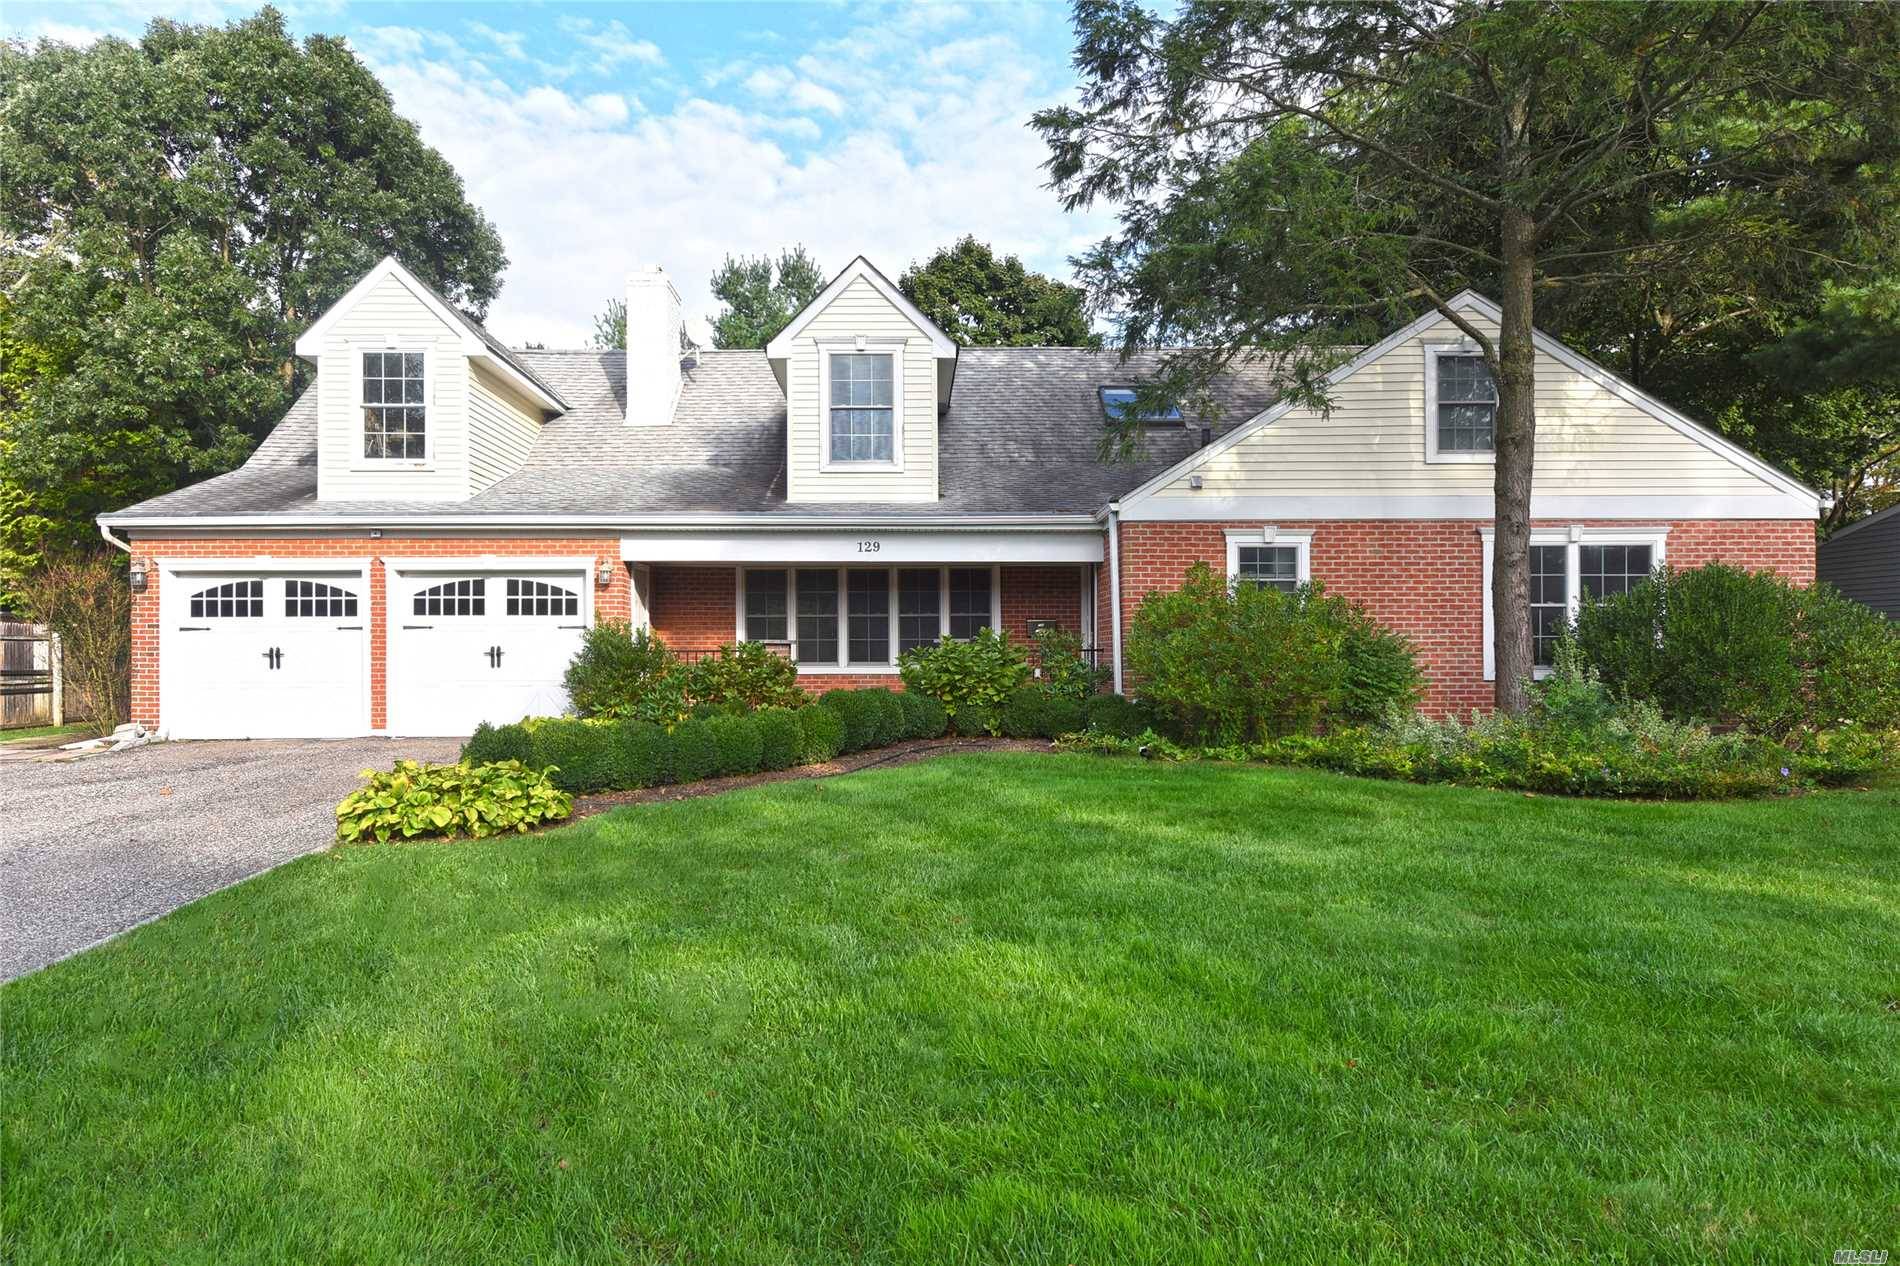 Exquisite Colonial In East Hills Fully Renovated In 2009 W 2 Car Garage.